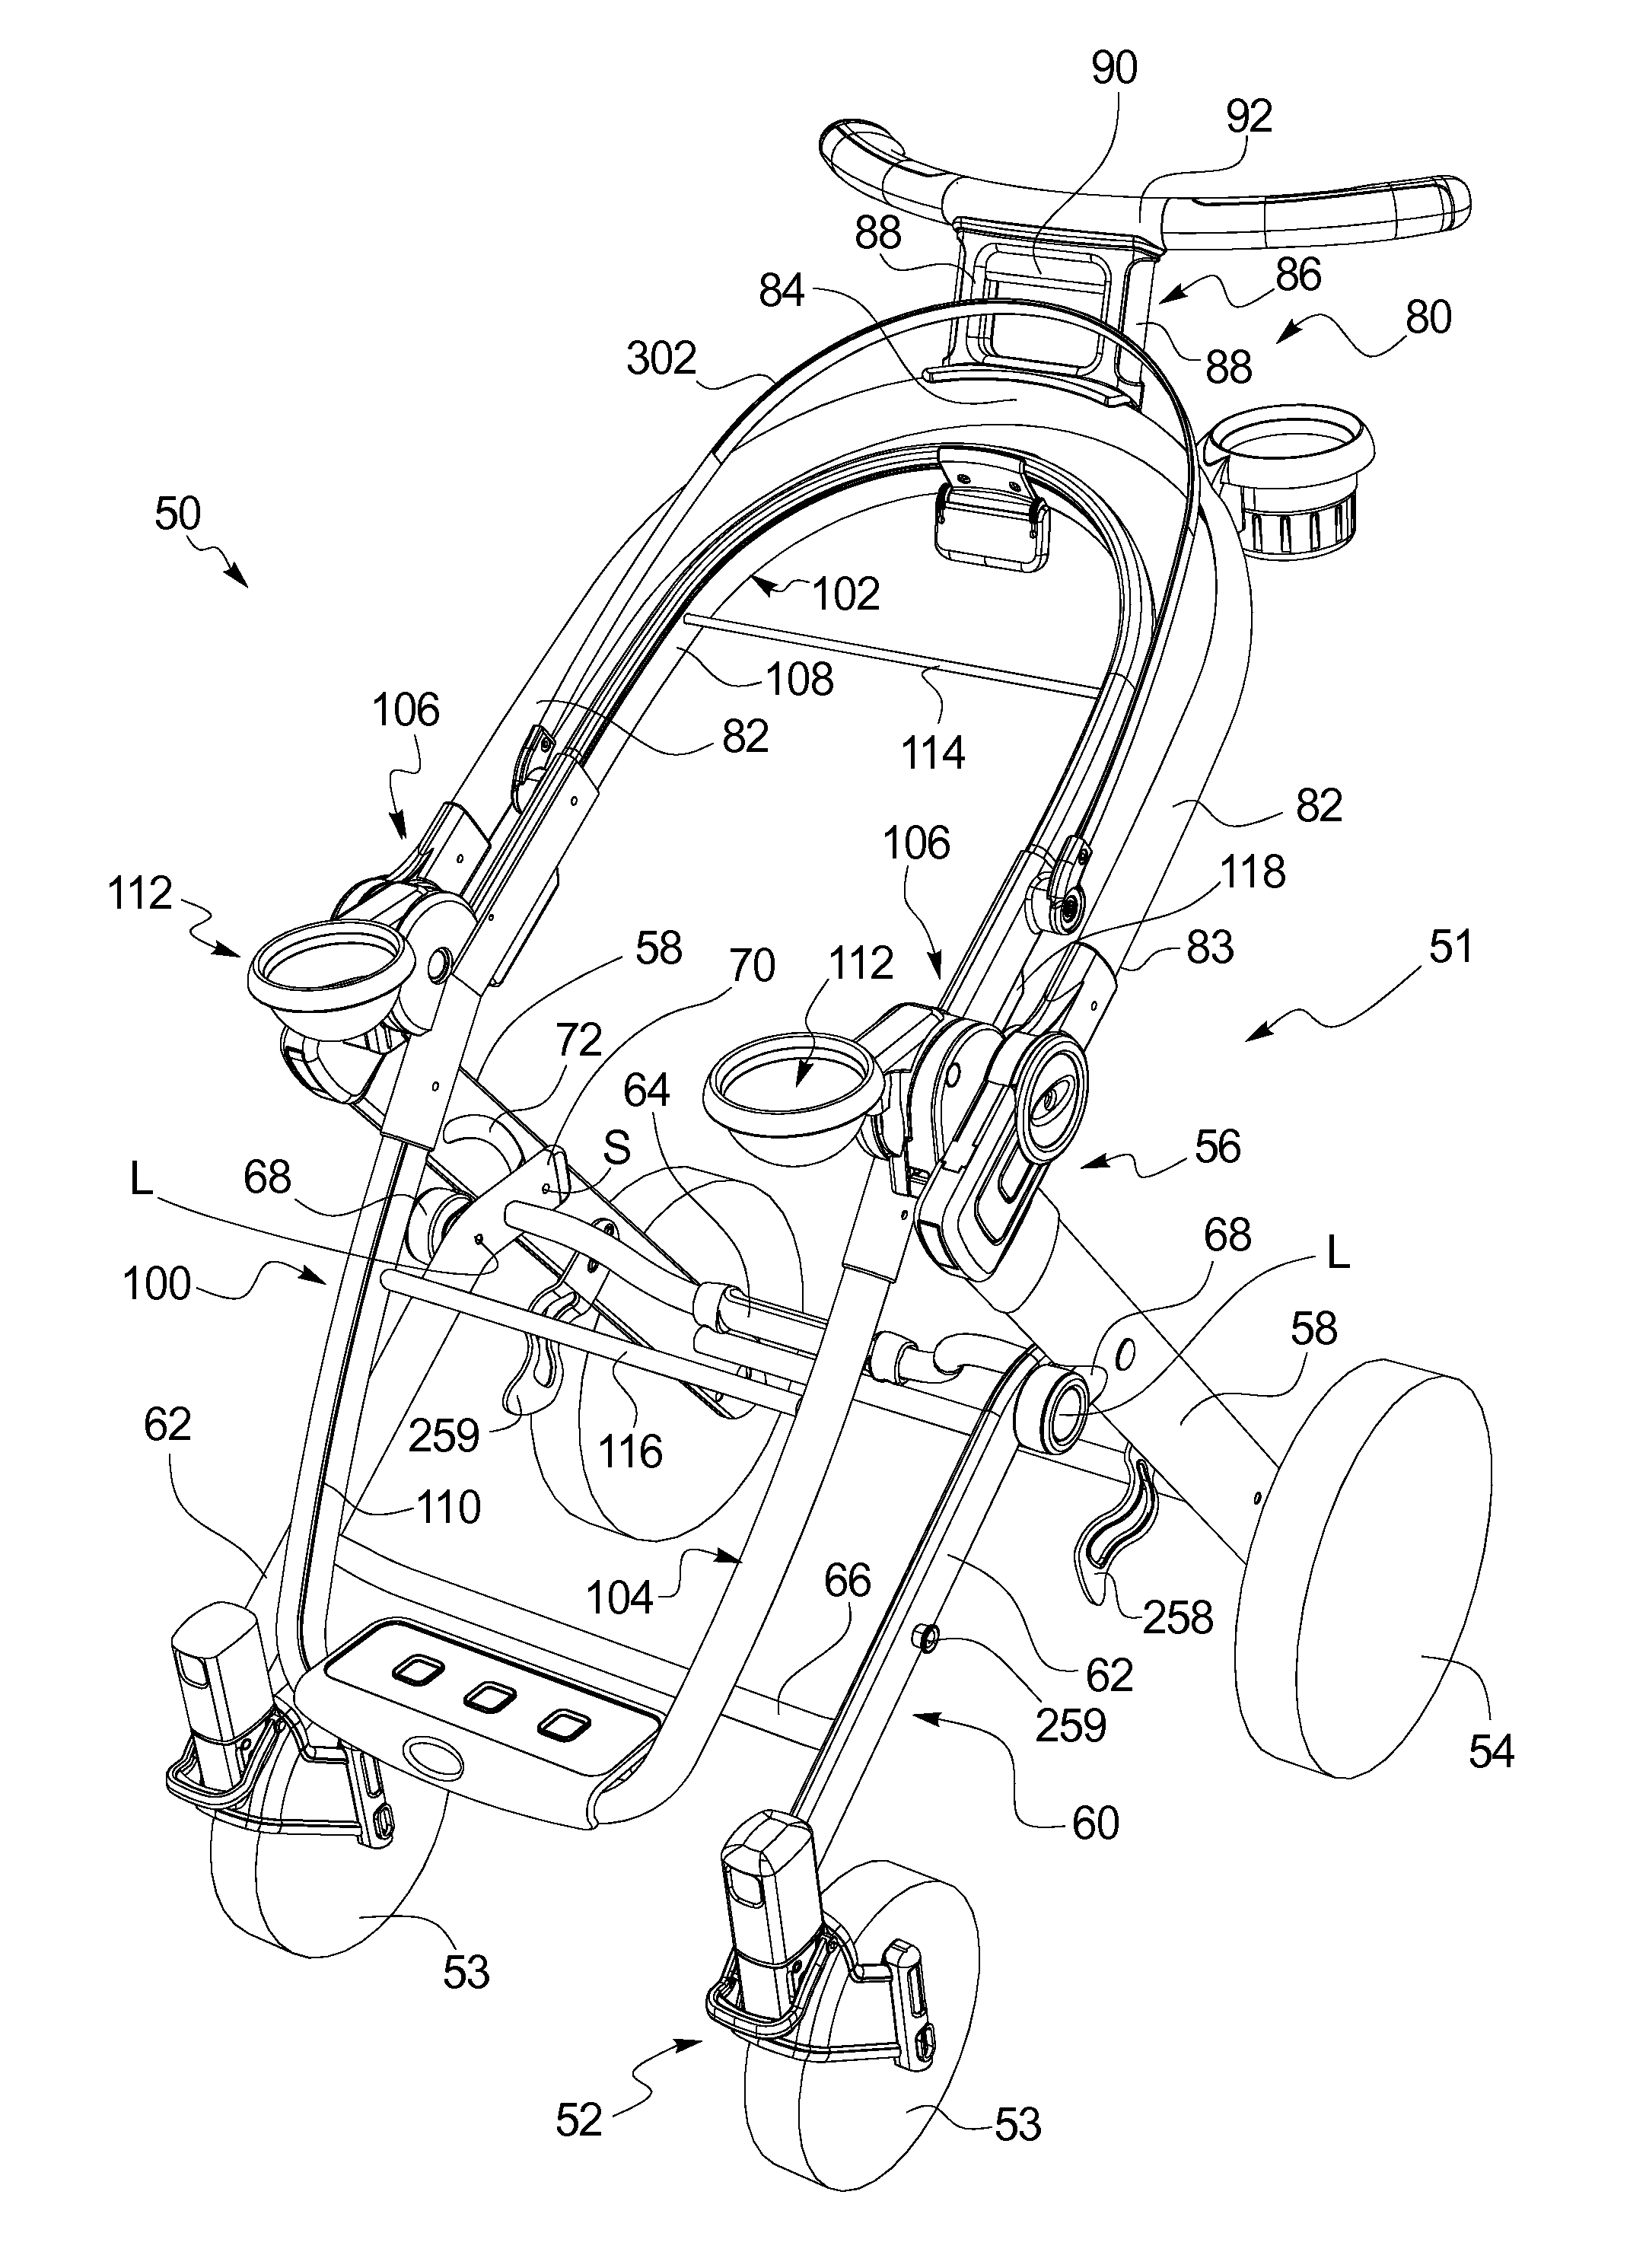 Foldable Stroller and Fold Linkage for Same